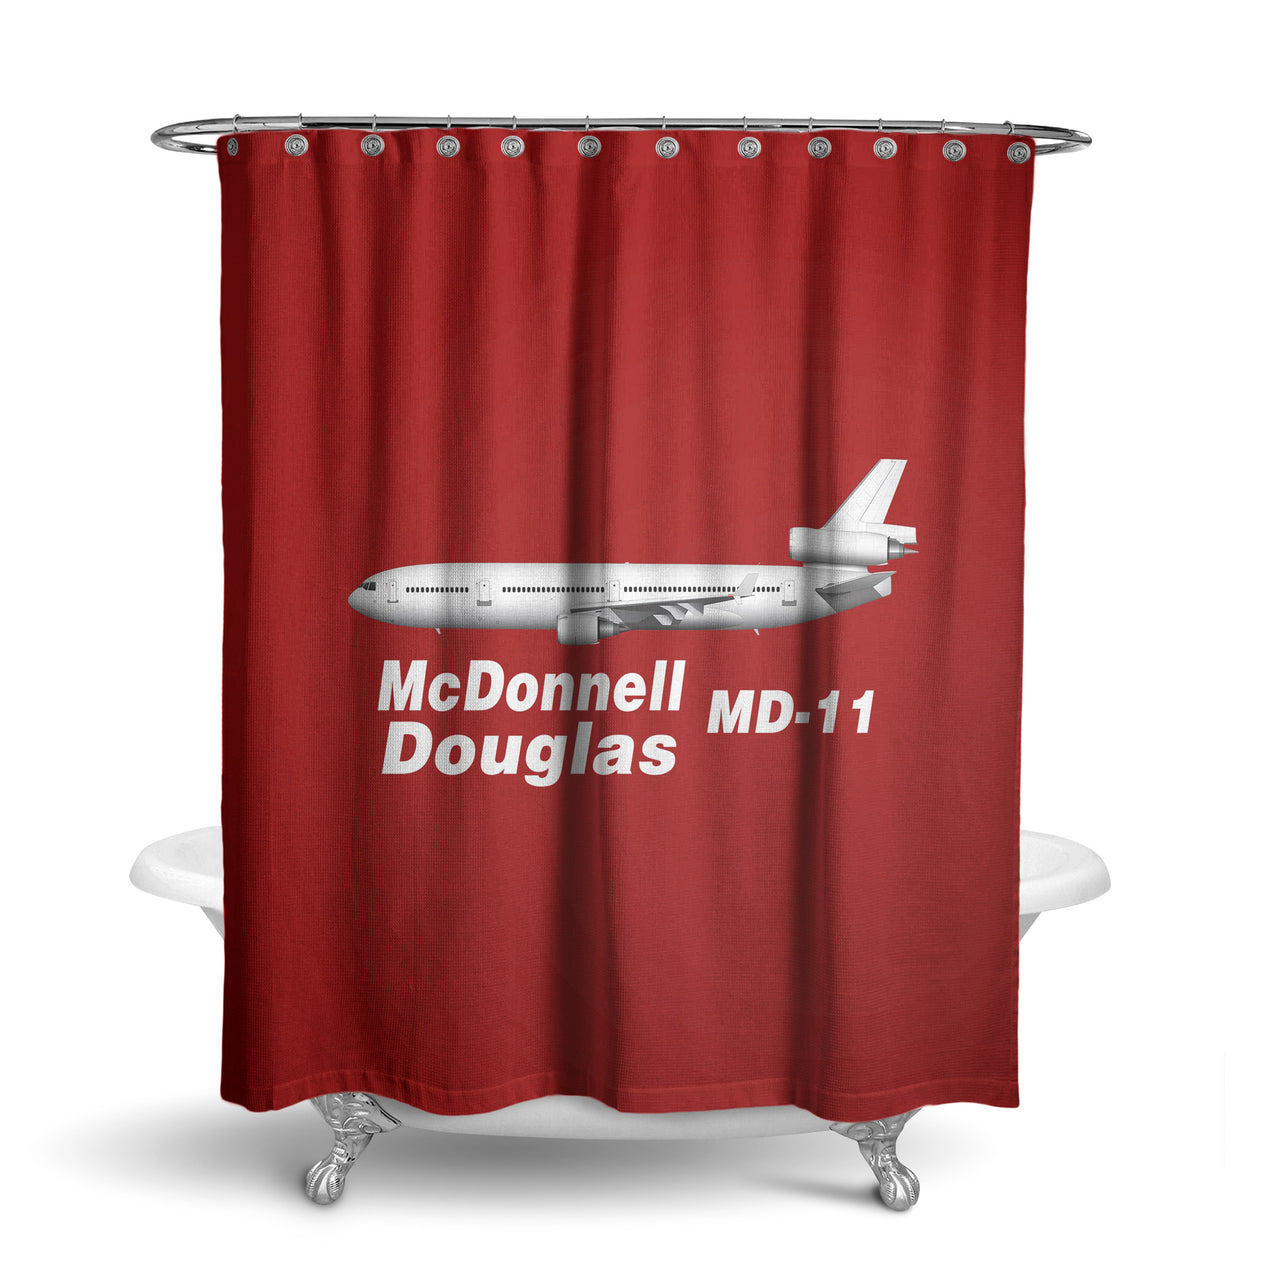 The McDonnell Douglas MD-11 Designed Shower Curtains